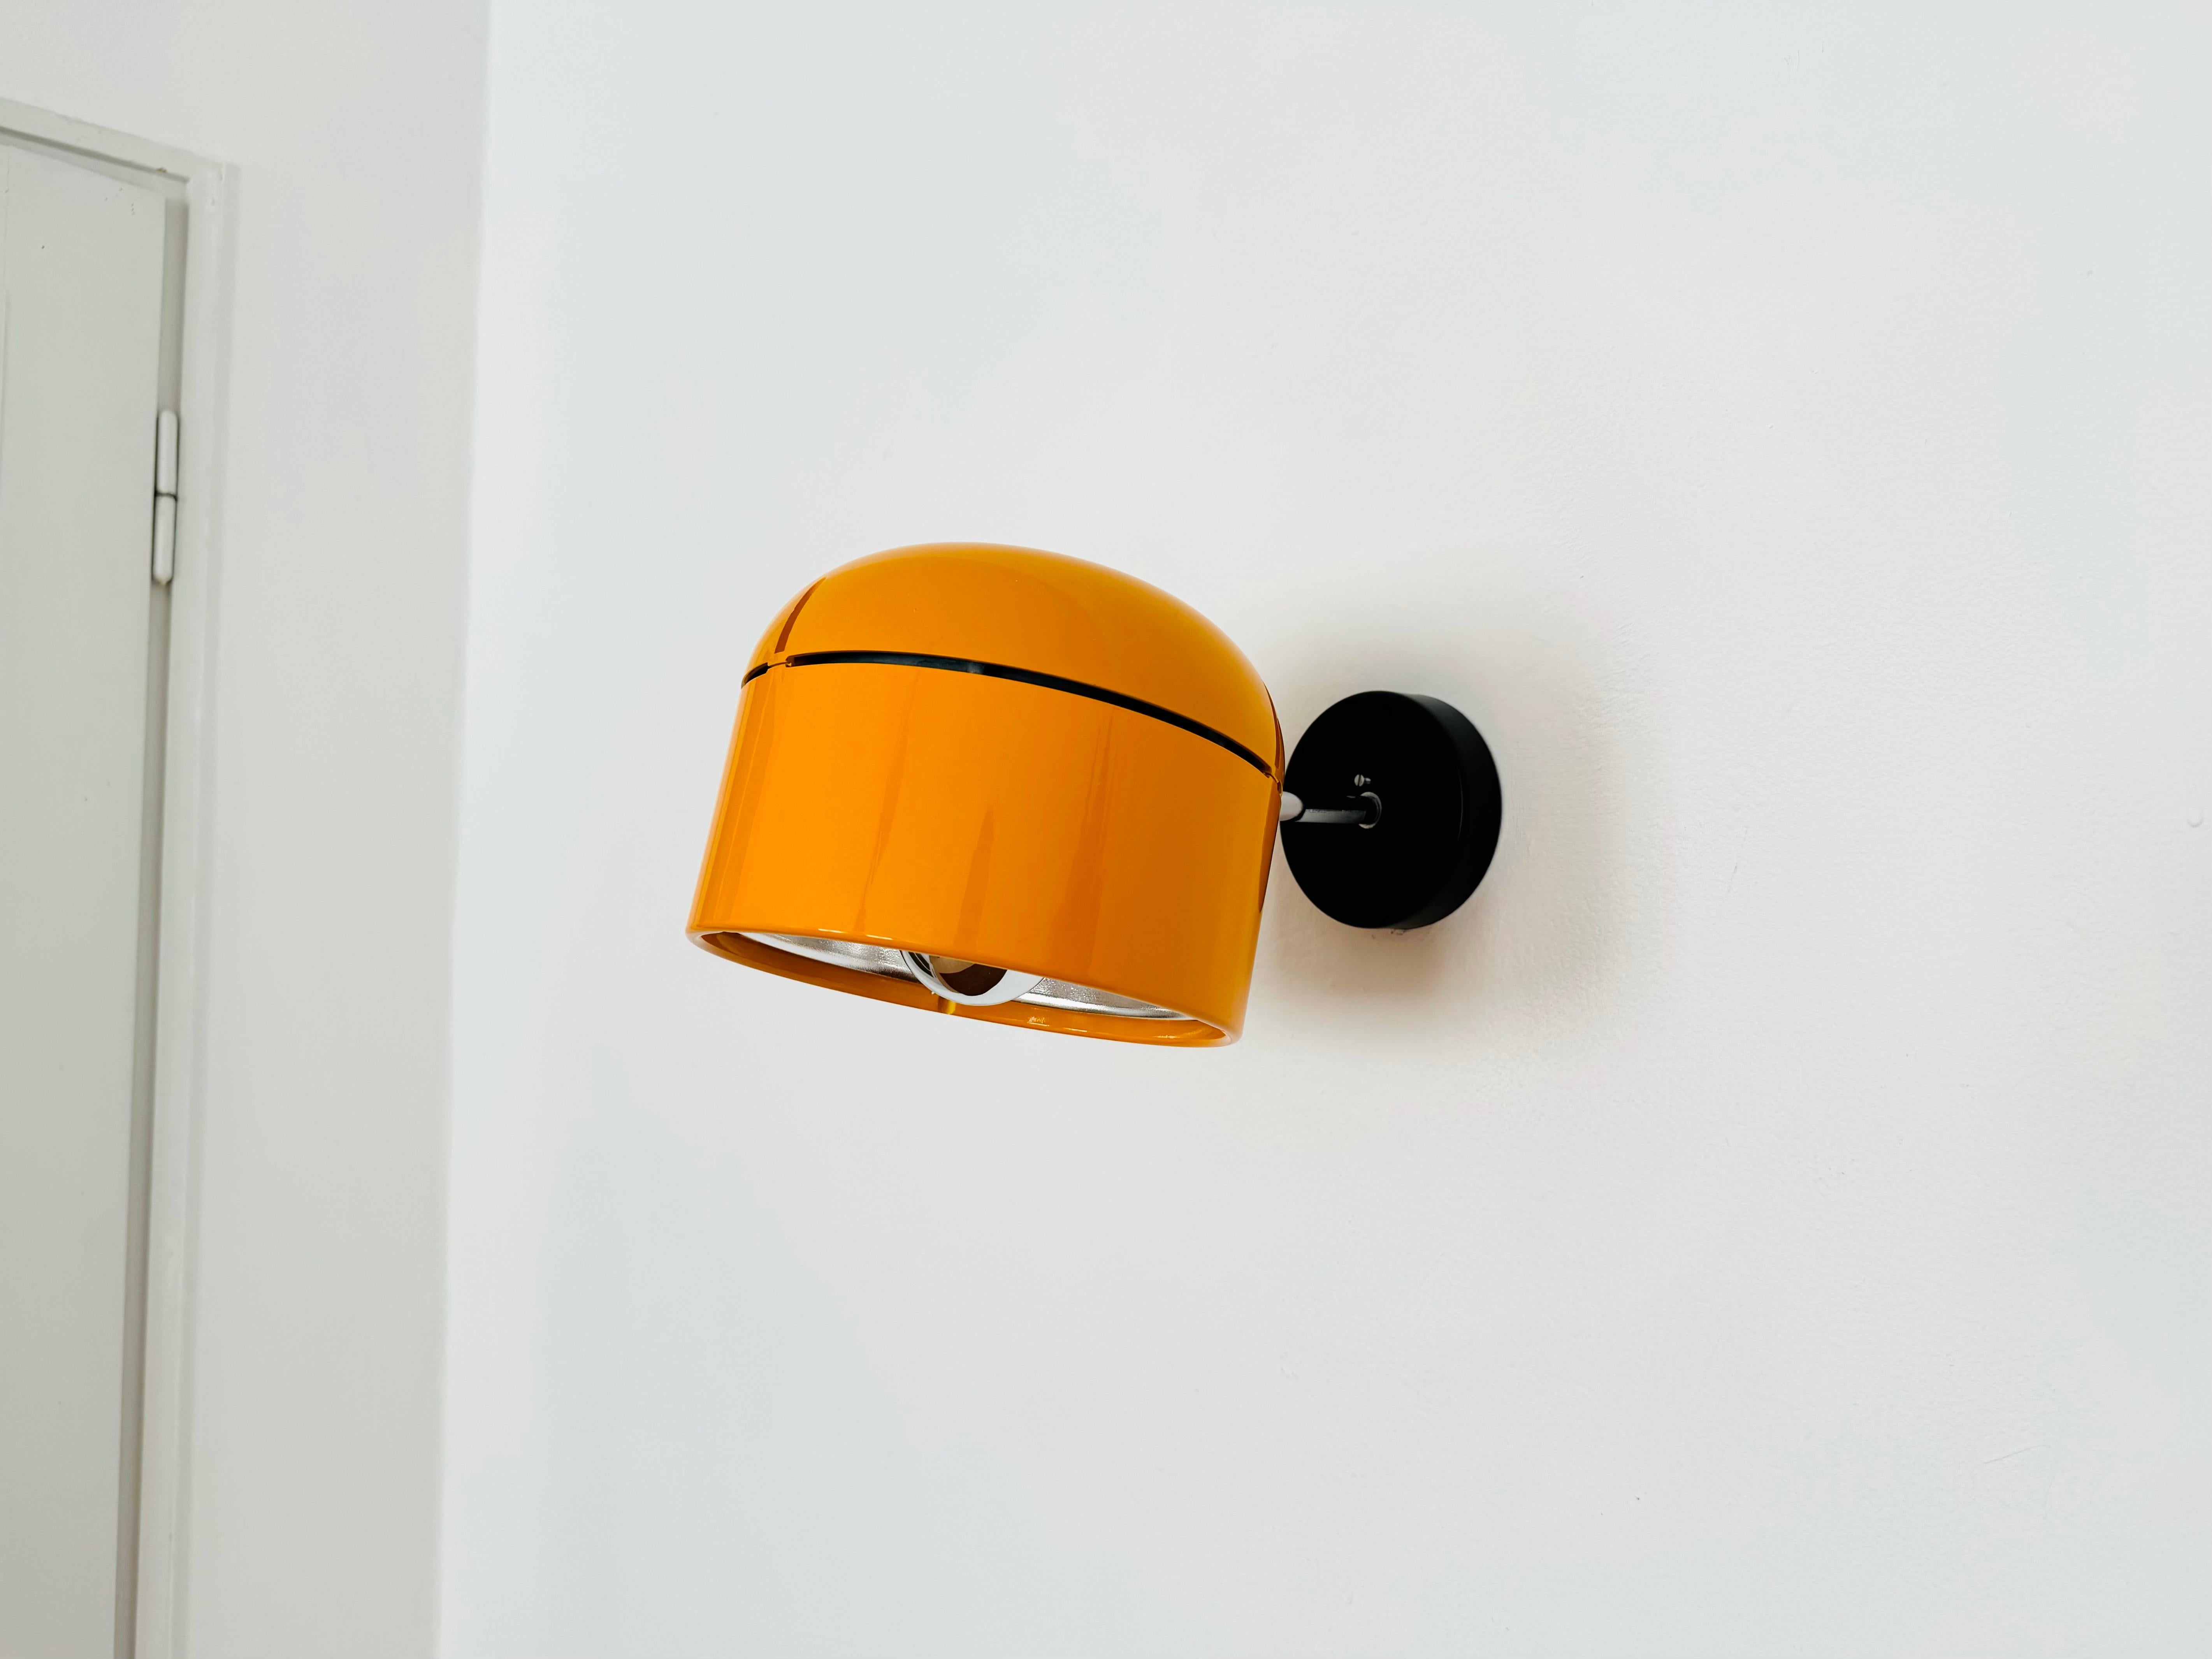 Fantastic lamp for wall or ceiling mounting from the 1970s.
The Staff brand is known for its high-quality workmanship and perfectionist design.
The large yellow-orange lamp head is infinitely adjustable.
The mirror reflector creates a focused light